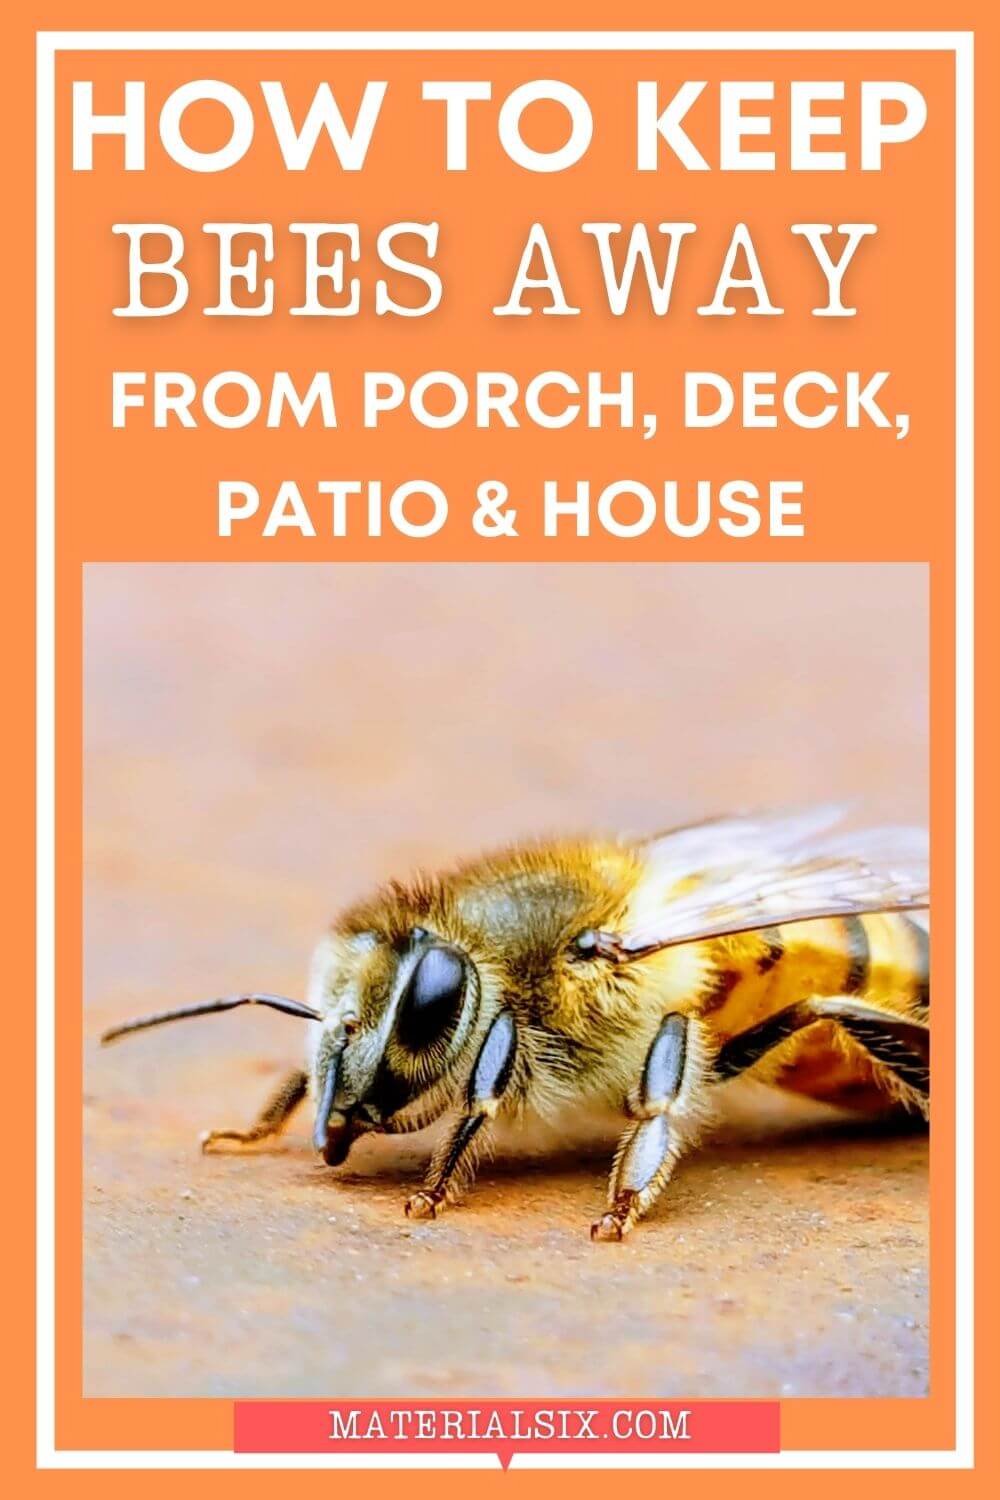 How to Keep Bees Away From Porch, Deck, Patio